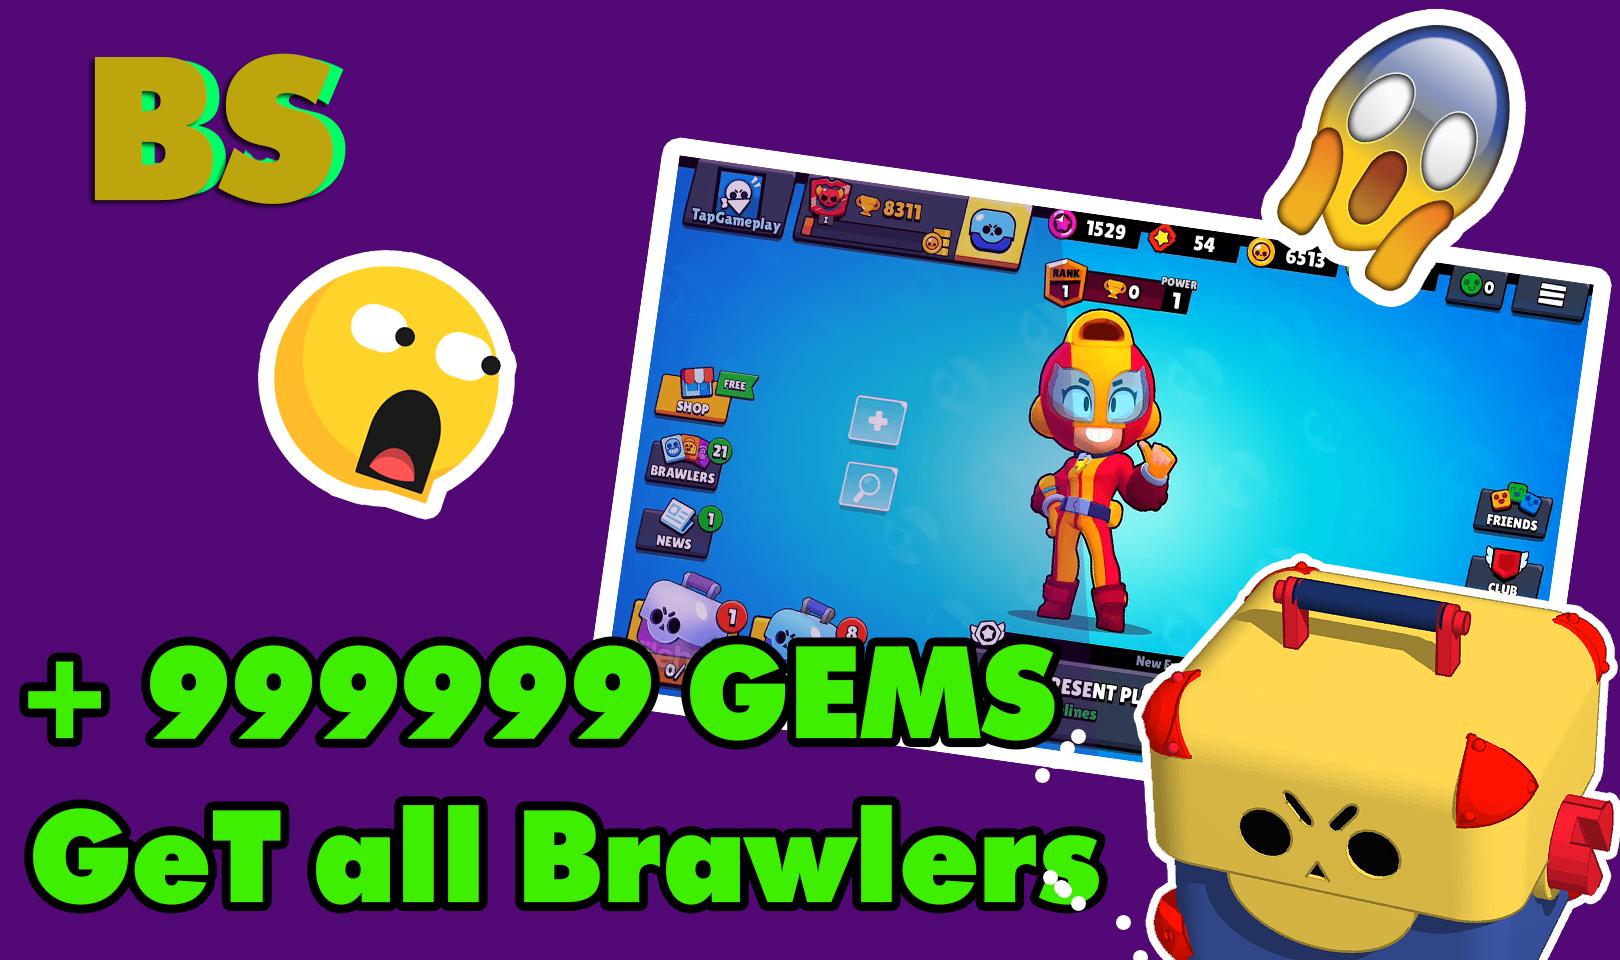 Box Spin Opener For Brawl Stars Gems And Brawlers For Android Apk Download - foto brawl stars collage